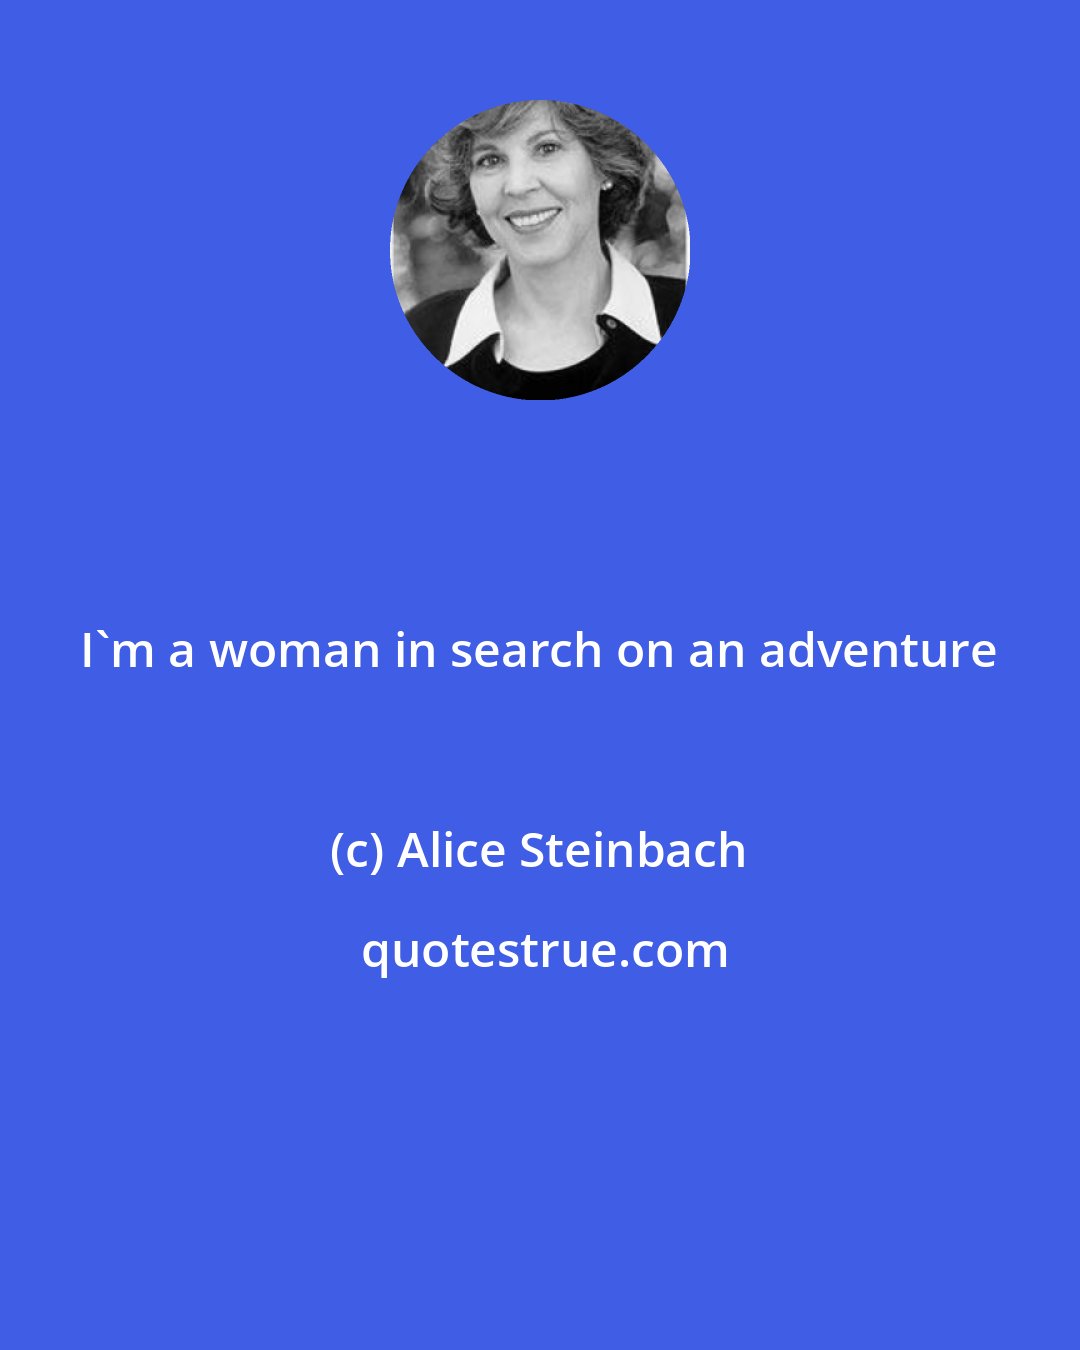 Alice Steinbach: I'm a woman in search on an adventure